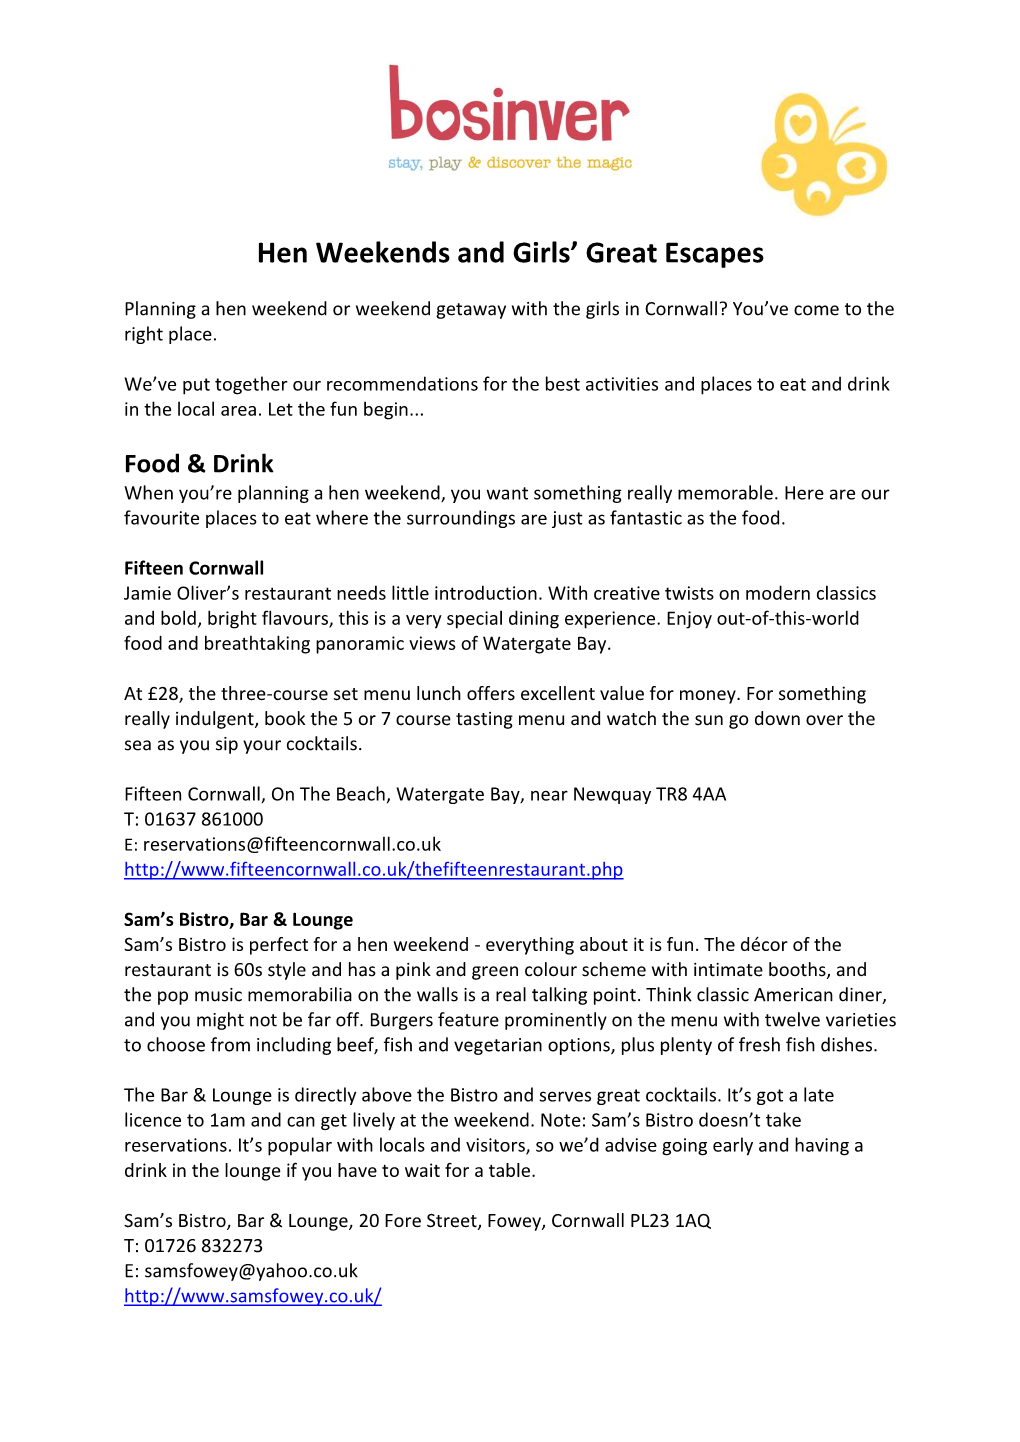 Hen Weekends and Girls' Great Escapes